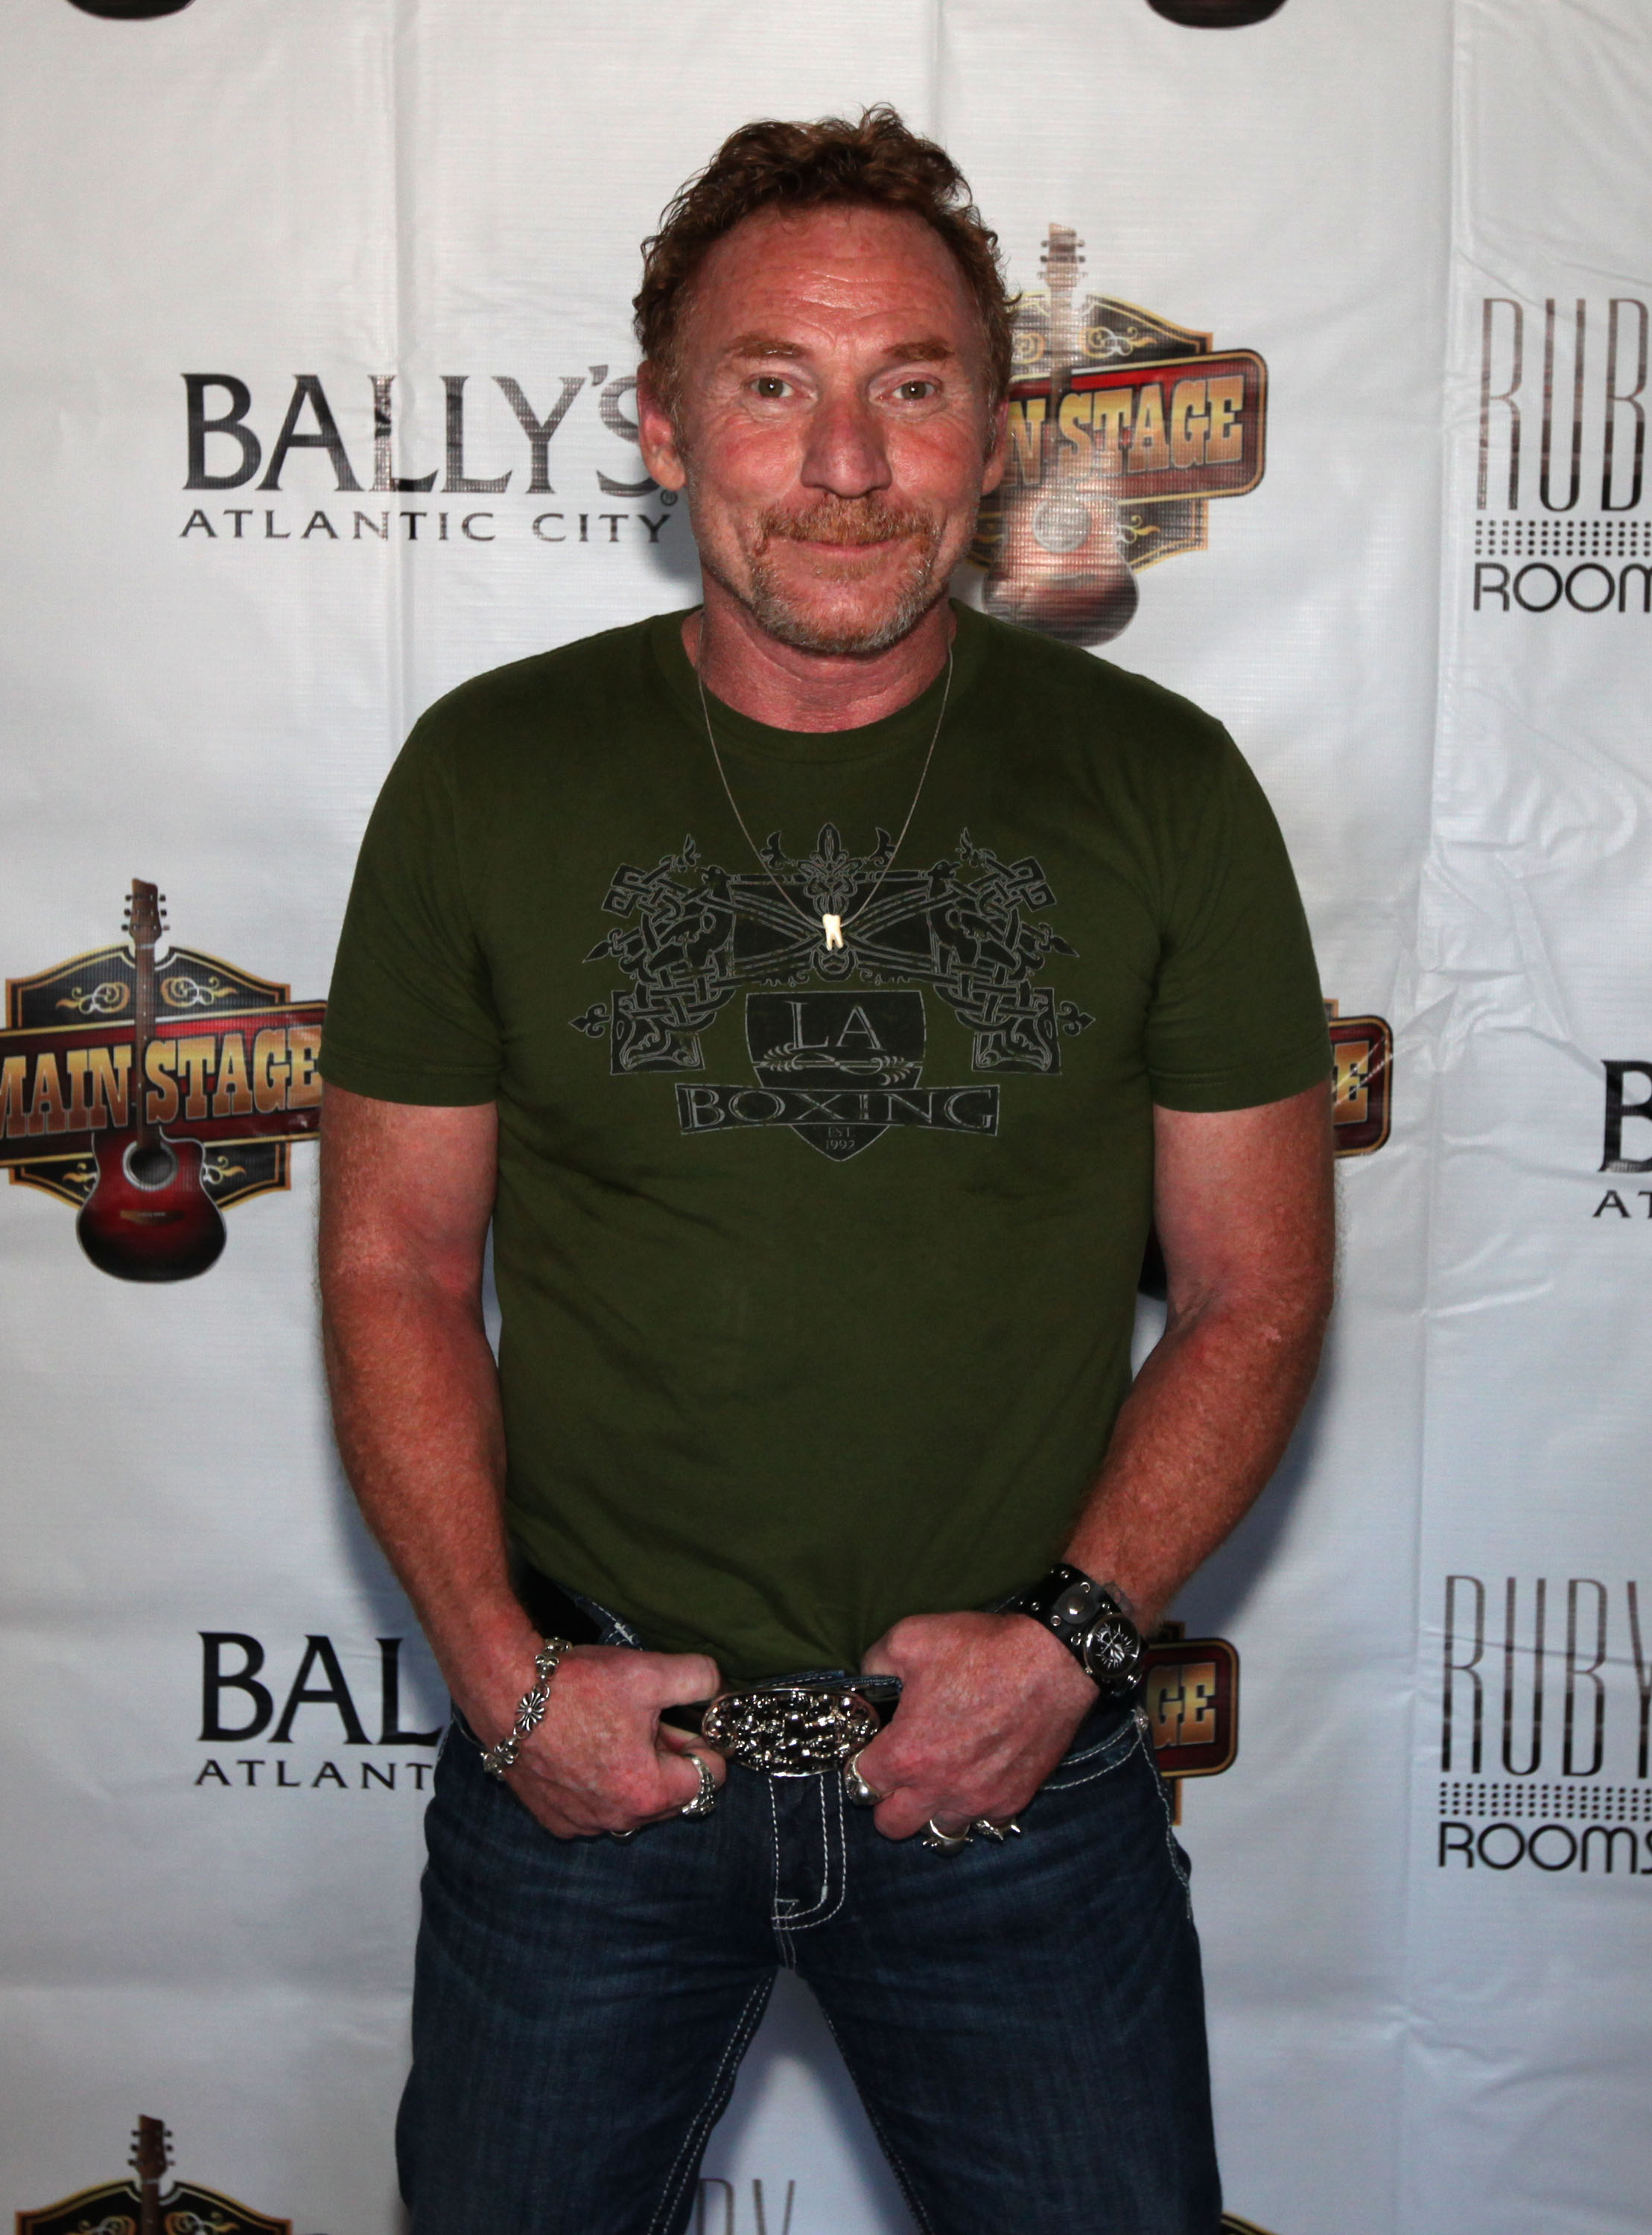 Danny Bonaduce attends the Battle of the Room Trashing Bands at Bally's Atlantic City on June 25, 2010 in Atlantic City, New Jersey | Source: Getty Images